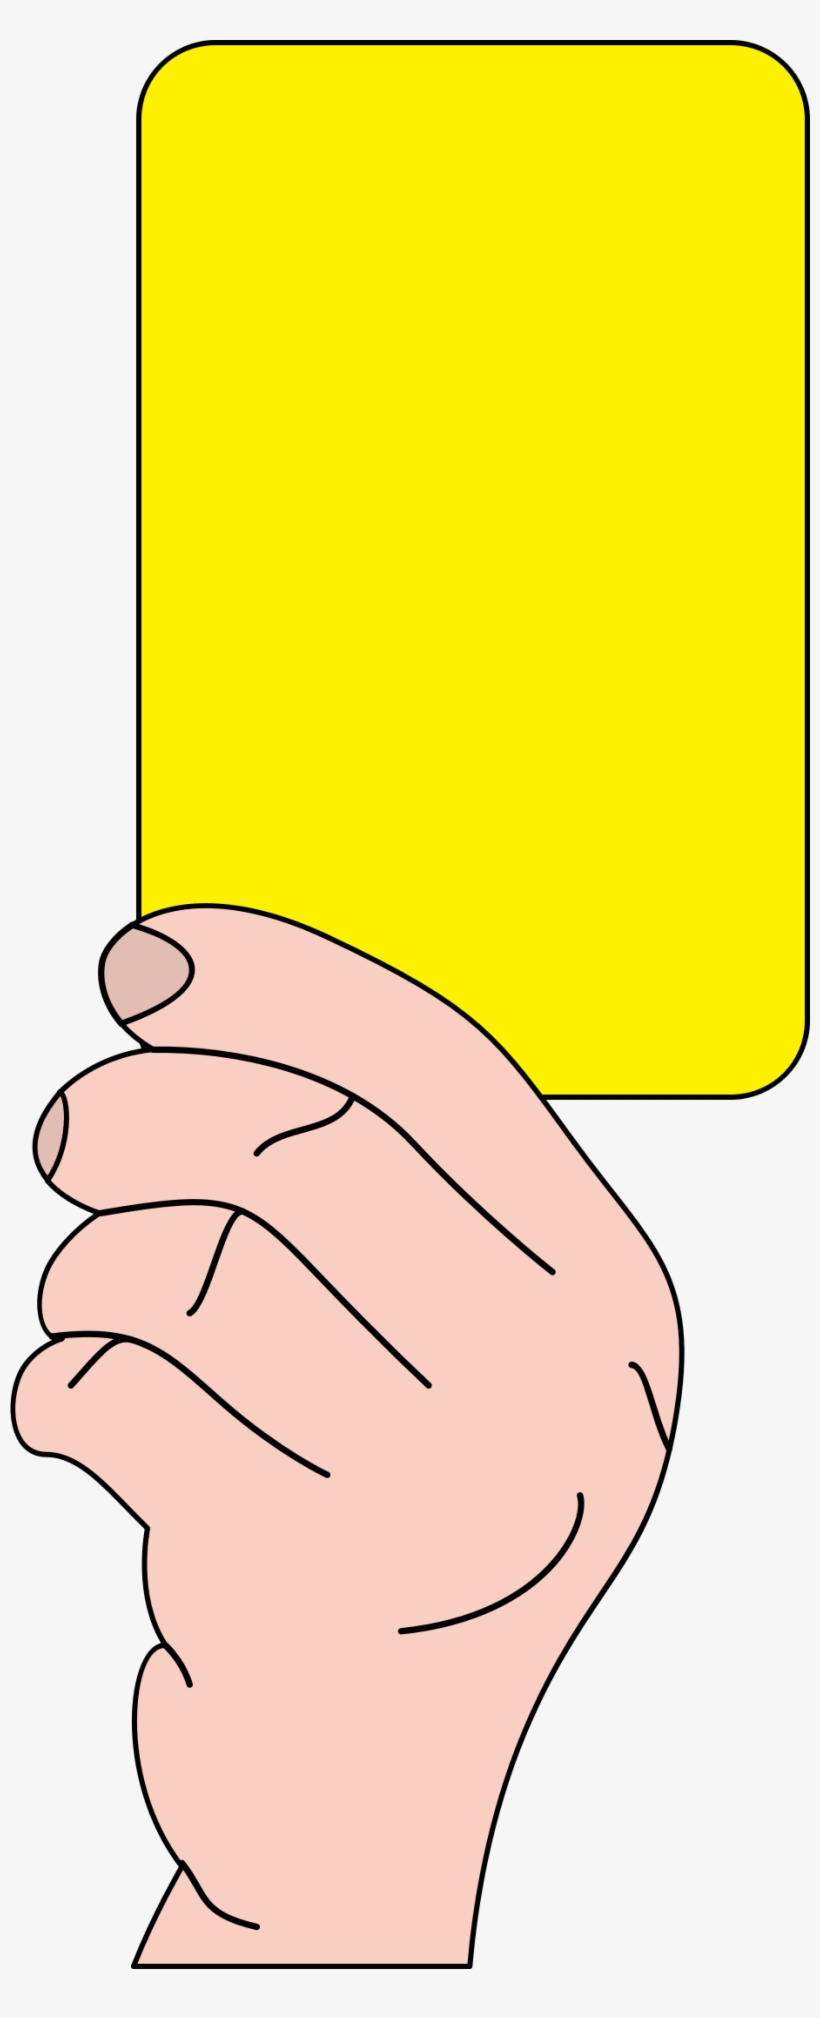 This Free Icons Png Design Of Referee Showing Yellow, transparent png #2341730